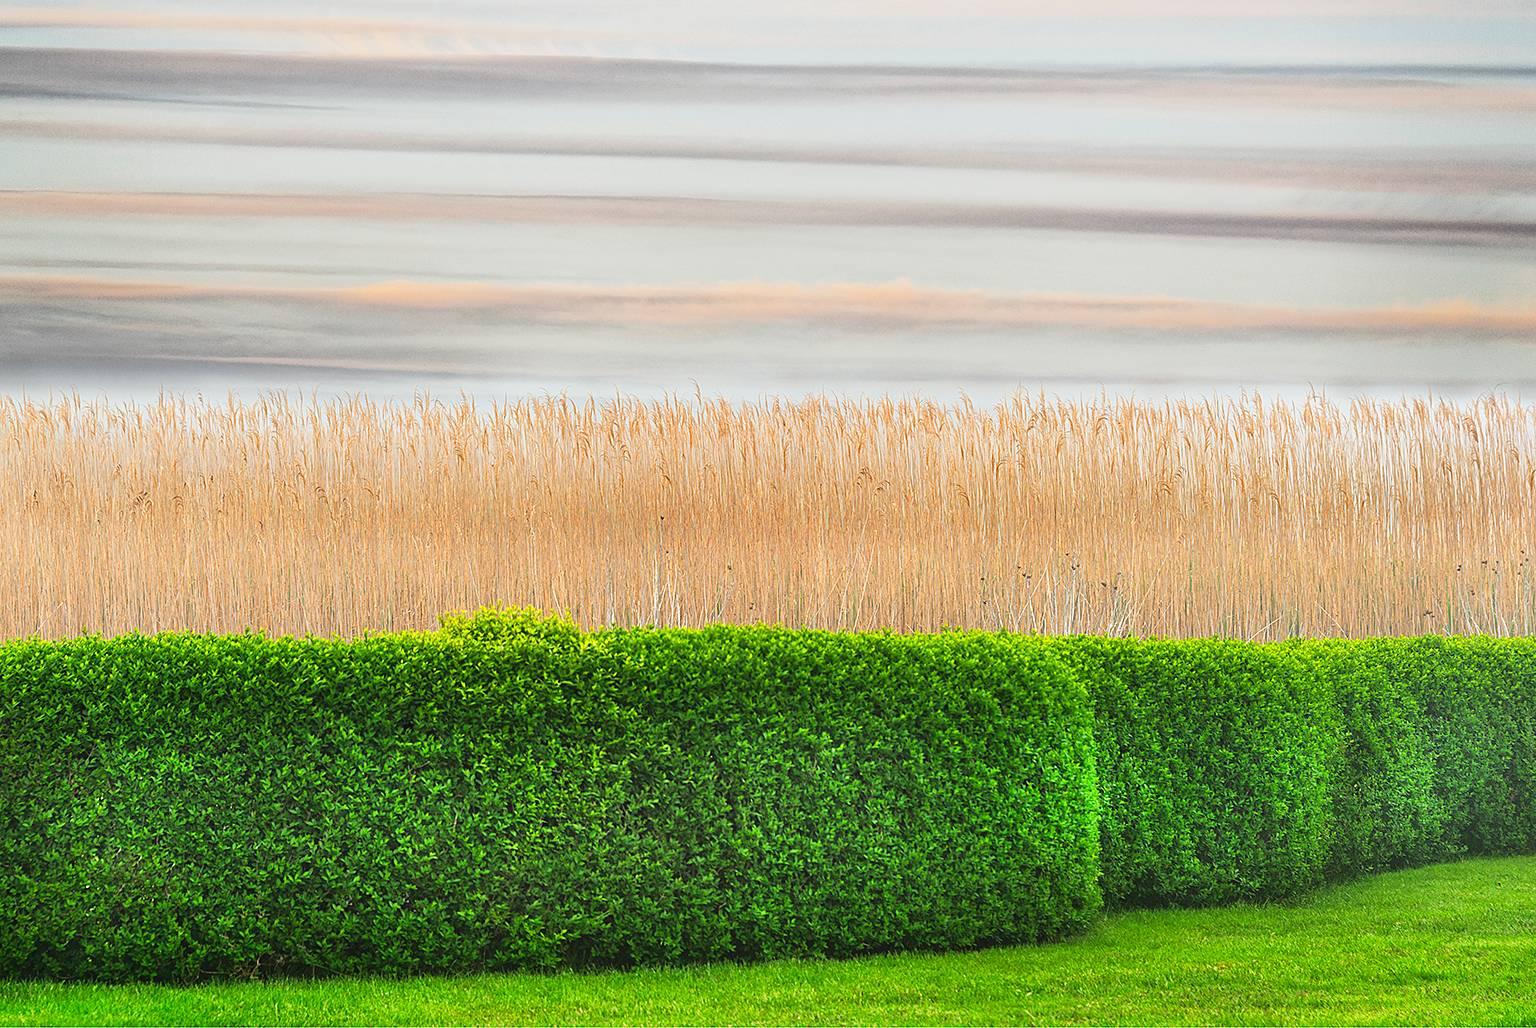 Mitchell Funk Landscape Photograph - Louse Point, East Hampton,  Abstract Photography in Green and Beige